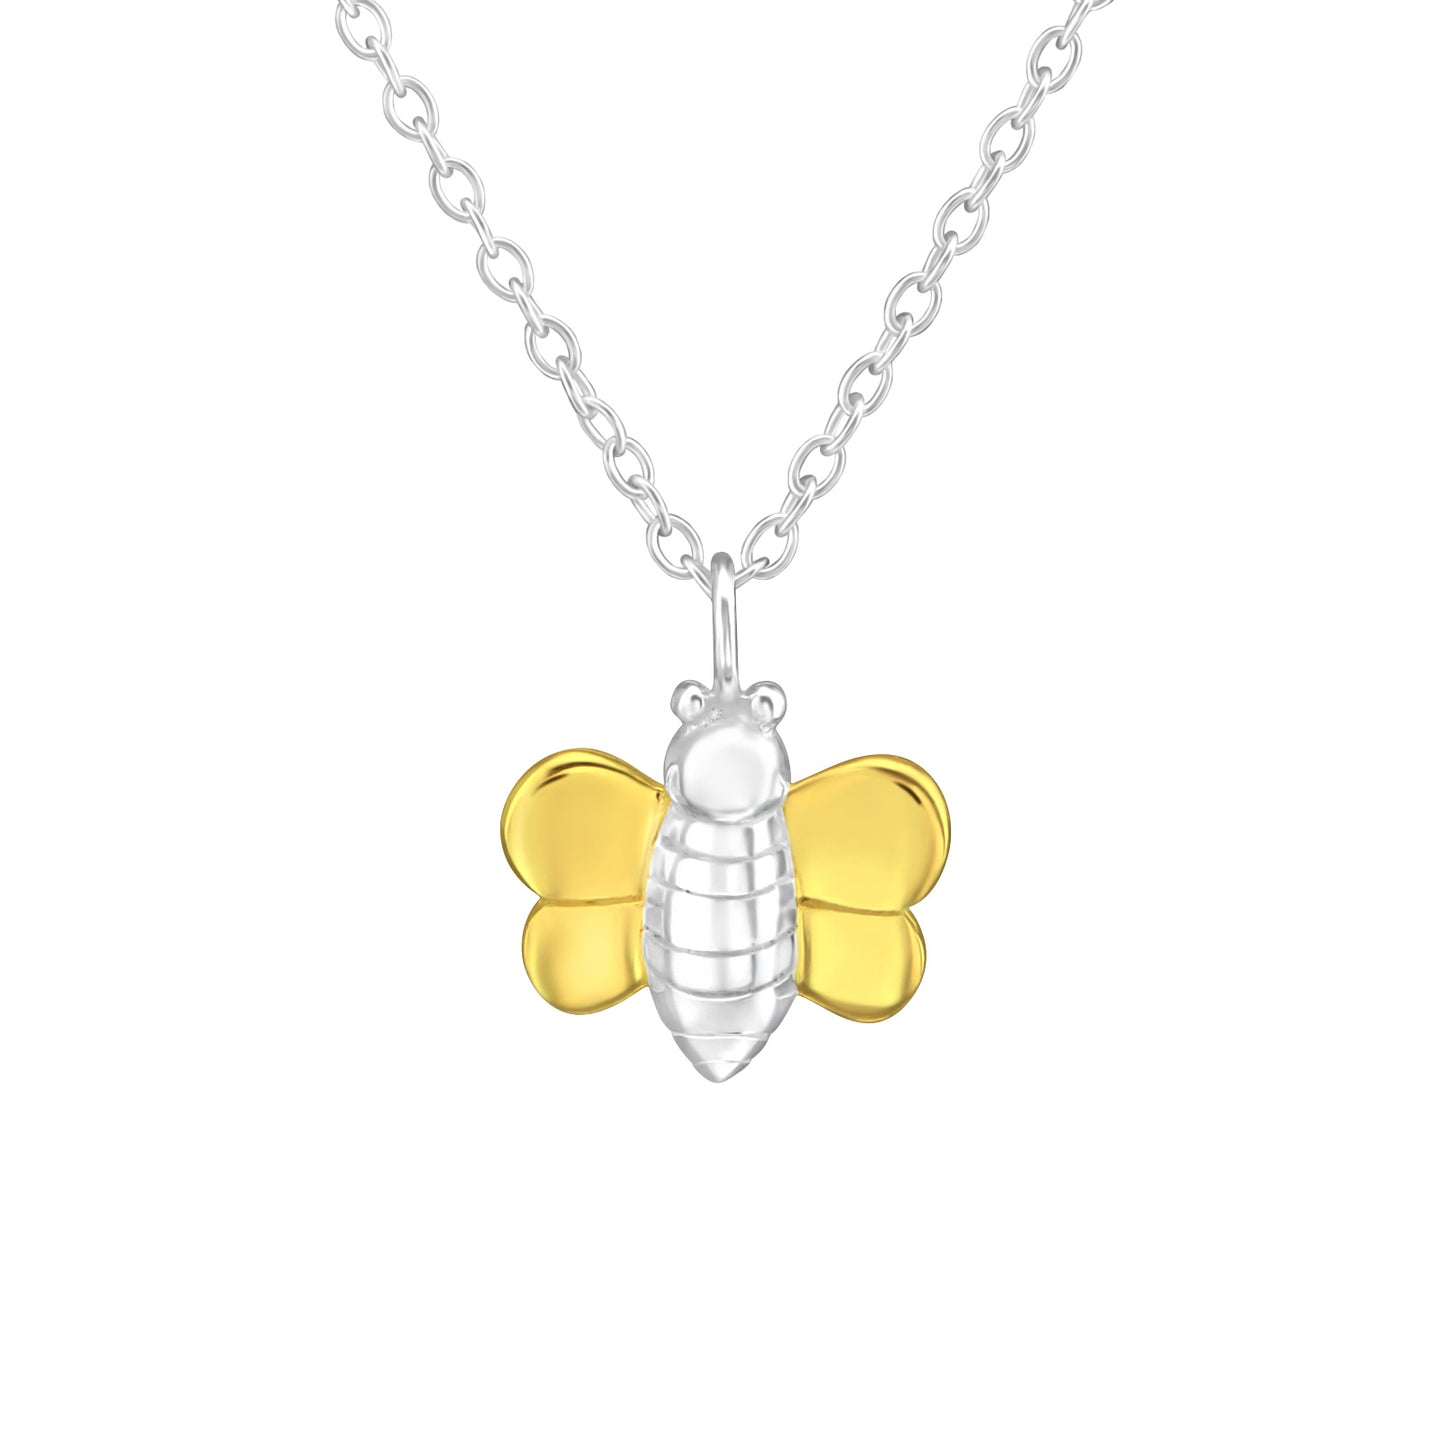 "BUZZ" Children's Bee Necklace (45cm) - 14k Gold & Silver on Sterling Silver